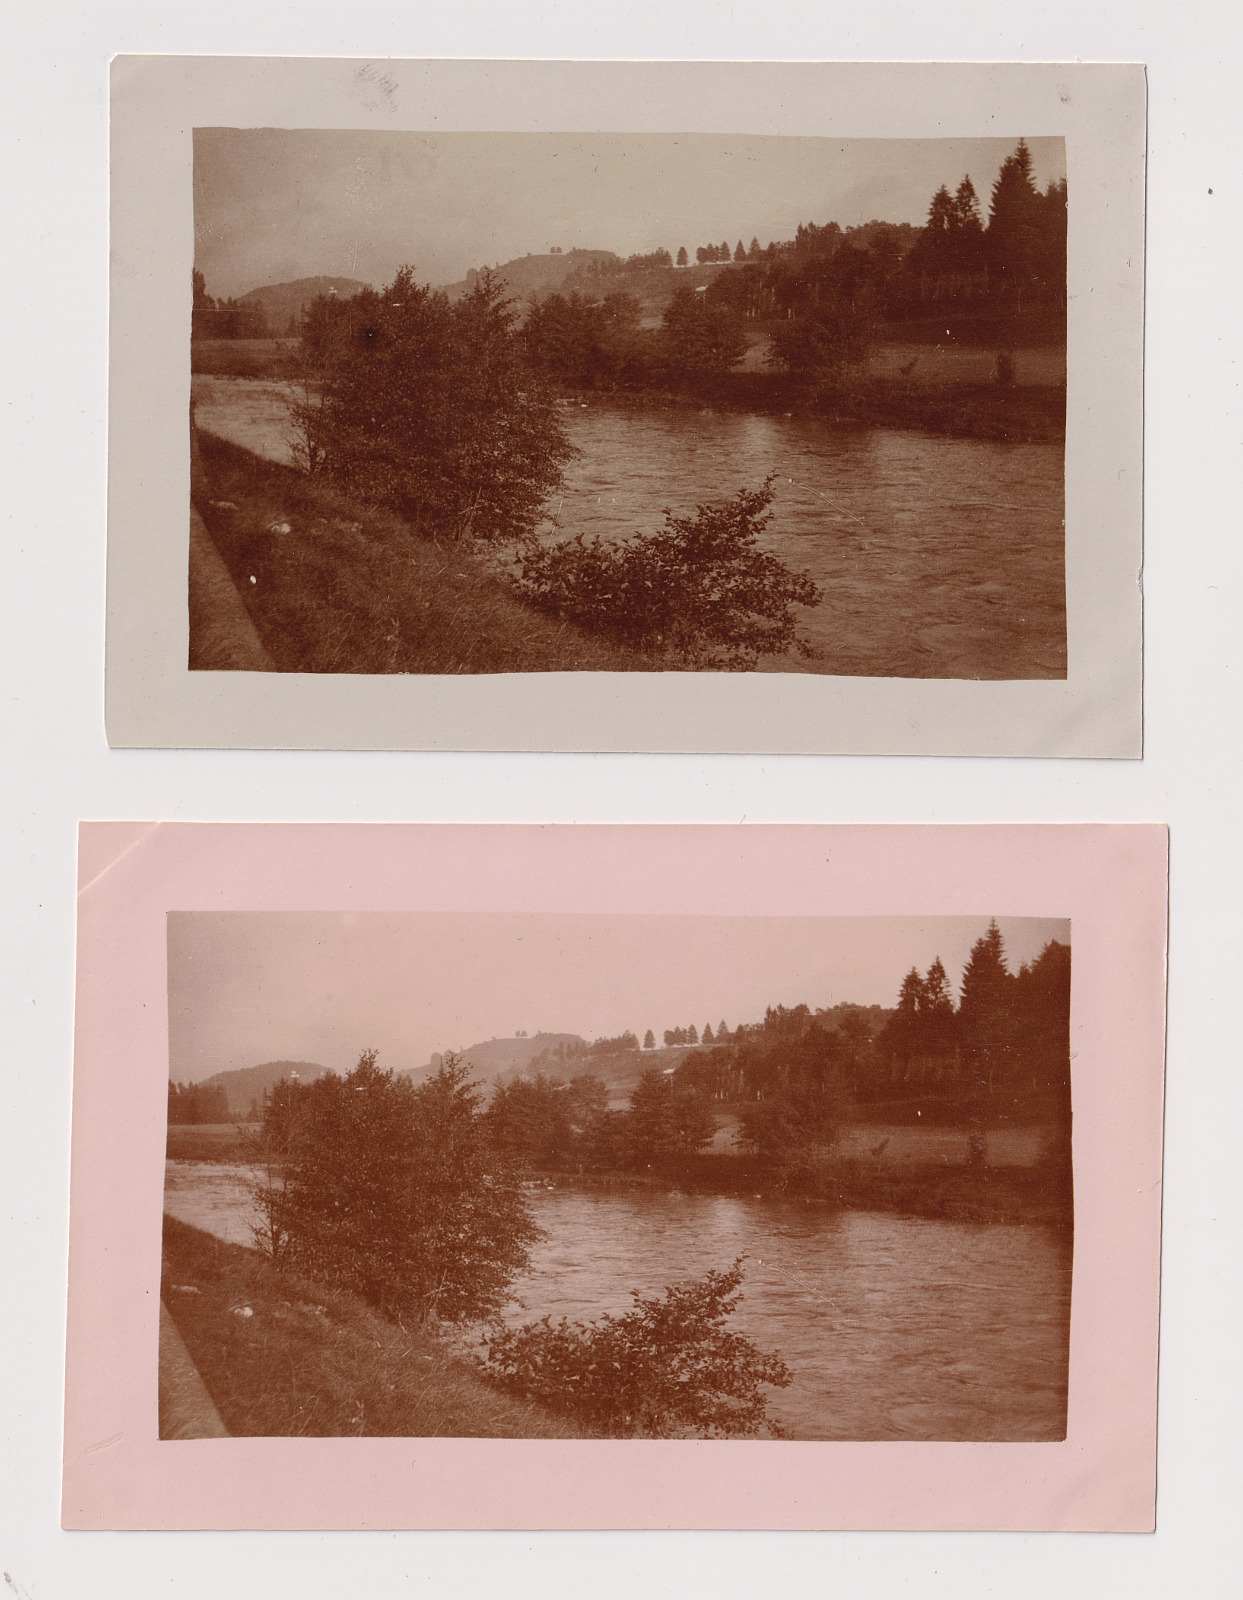 Lot of 2 photographs of the edge of the Gave (towards PAU) c.1905 - Vintage citrate prints